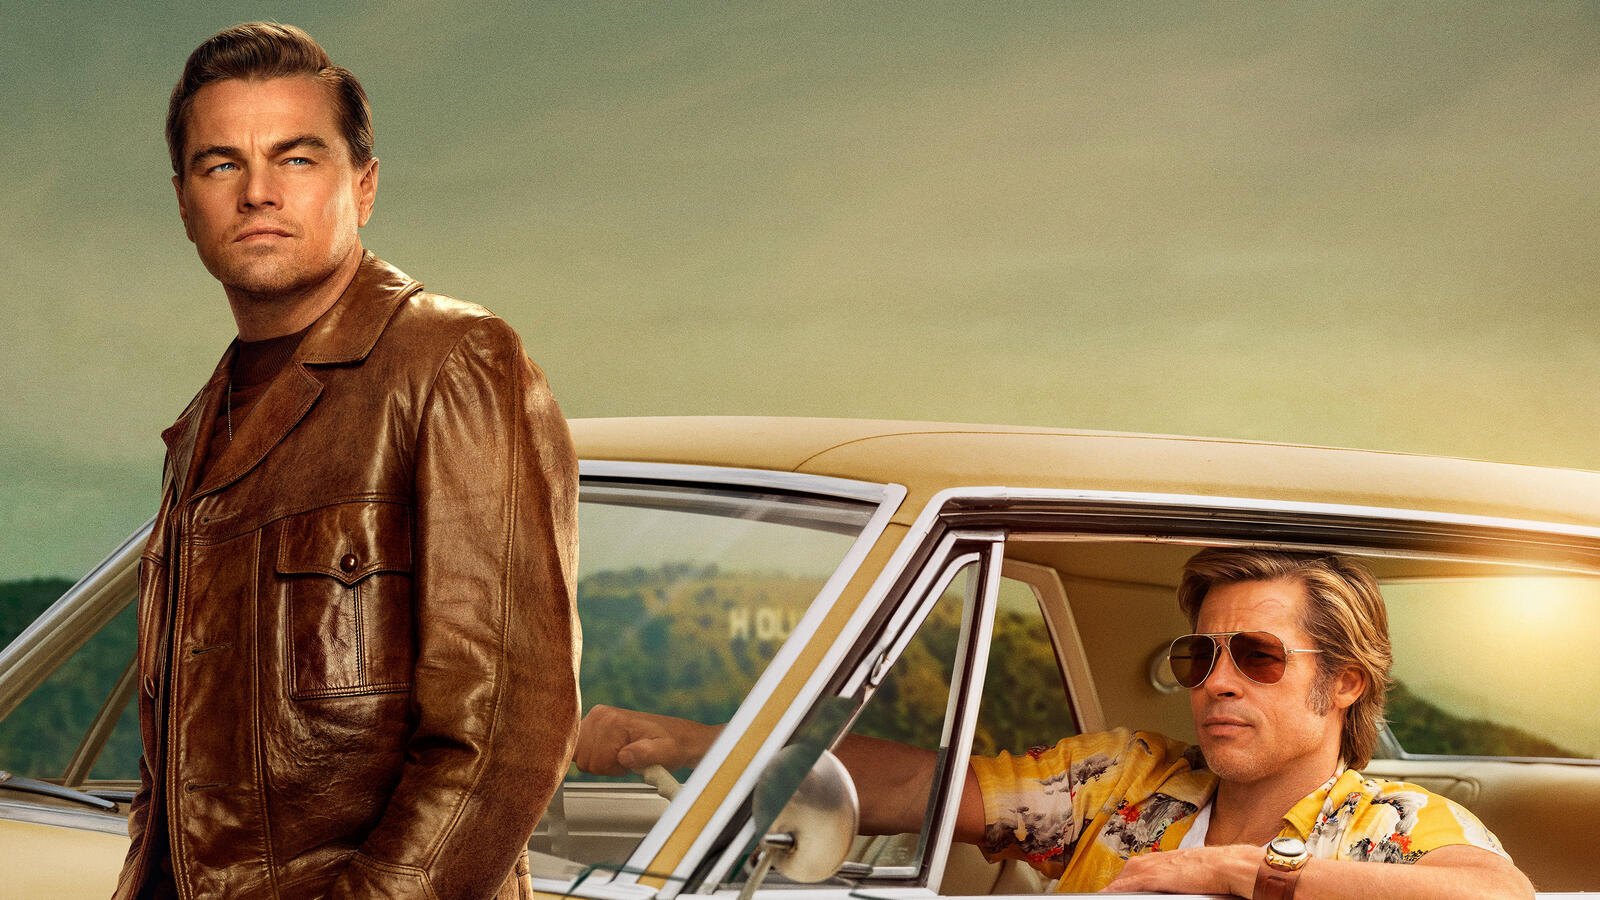 Wallpapers movies girls once upon a time in Hollywood on the desktop